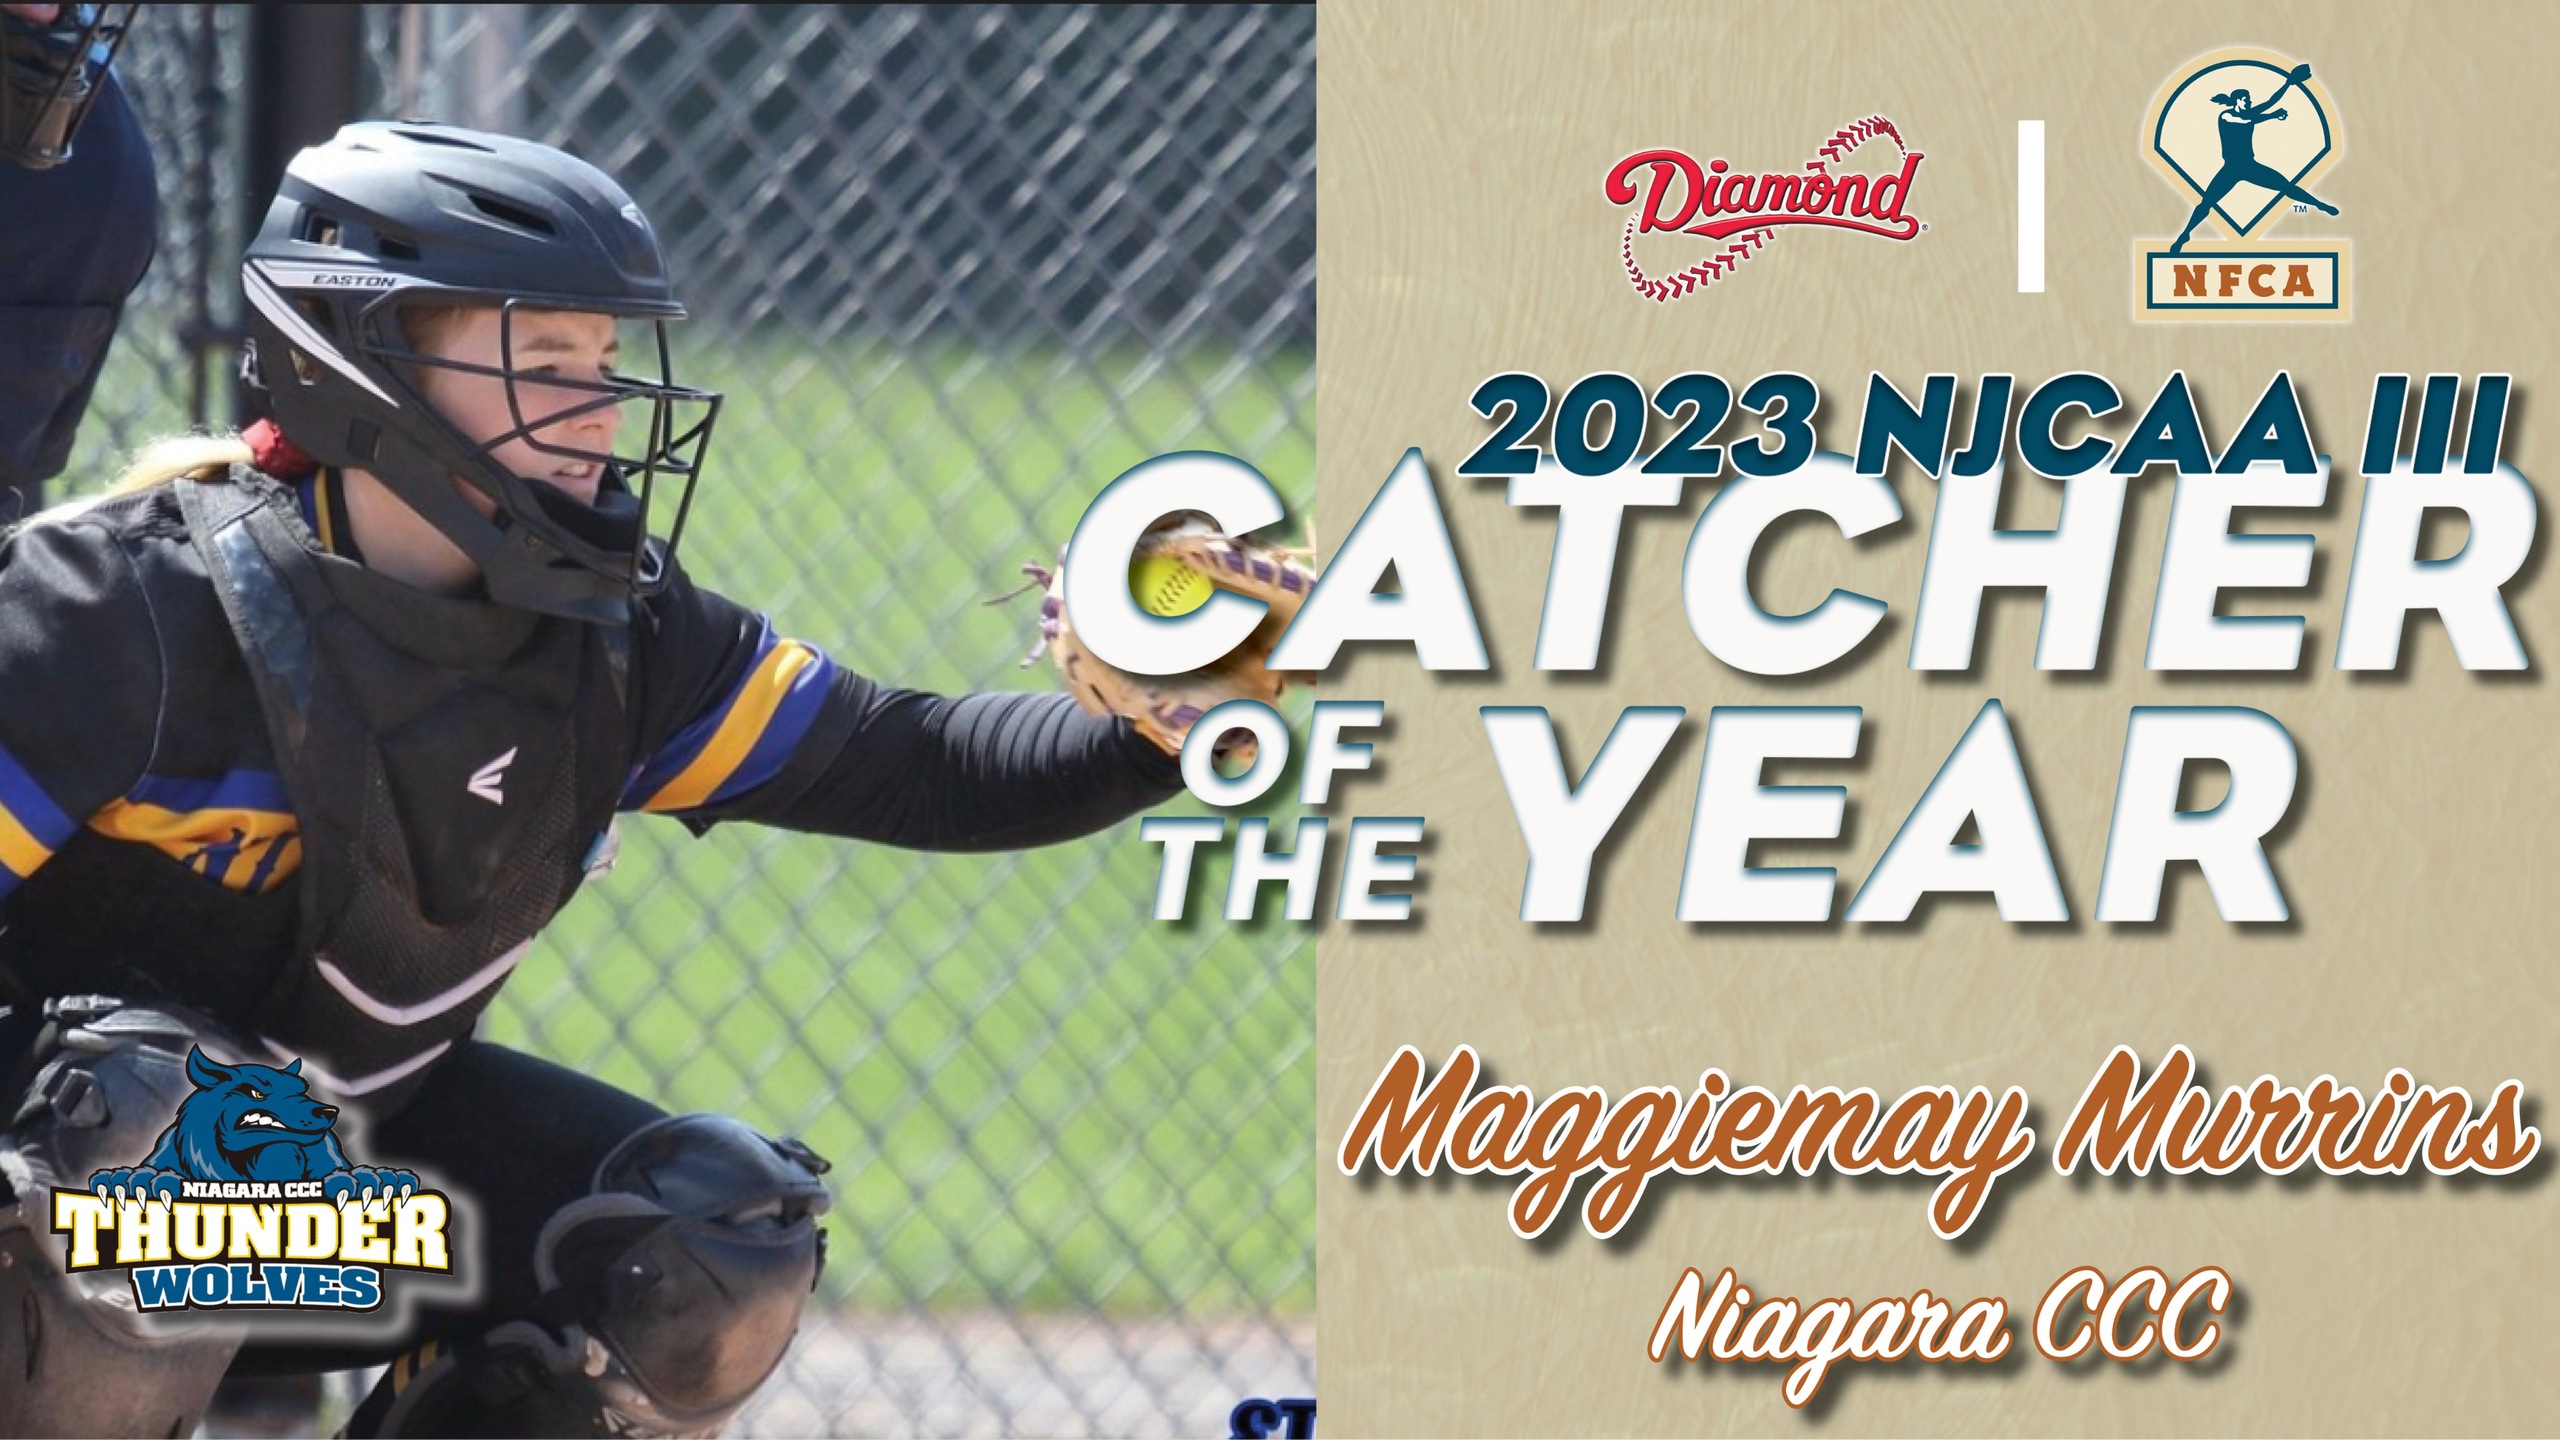 Murrins named Catcher of the Year